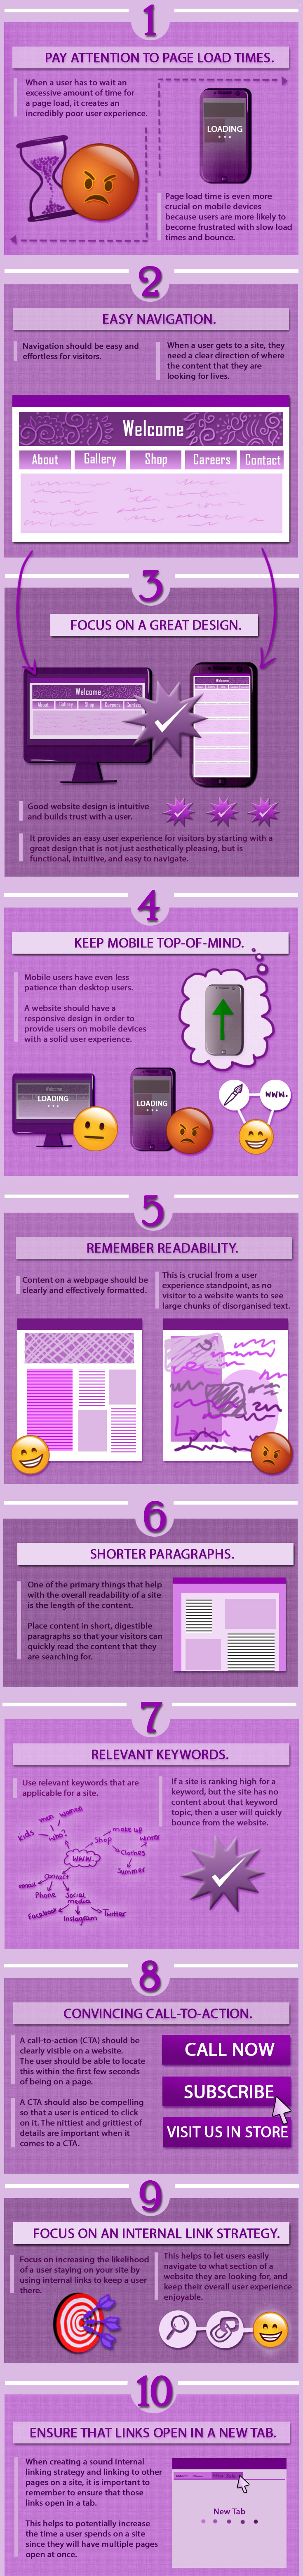 Bounce Rate Infographic